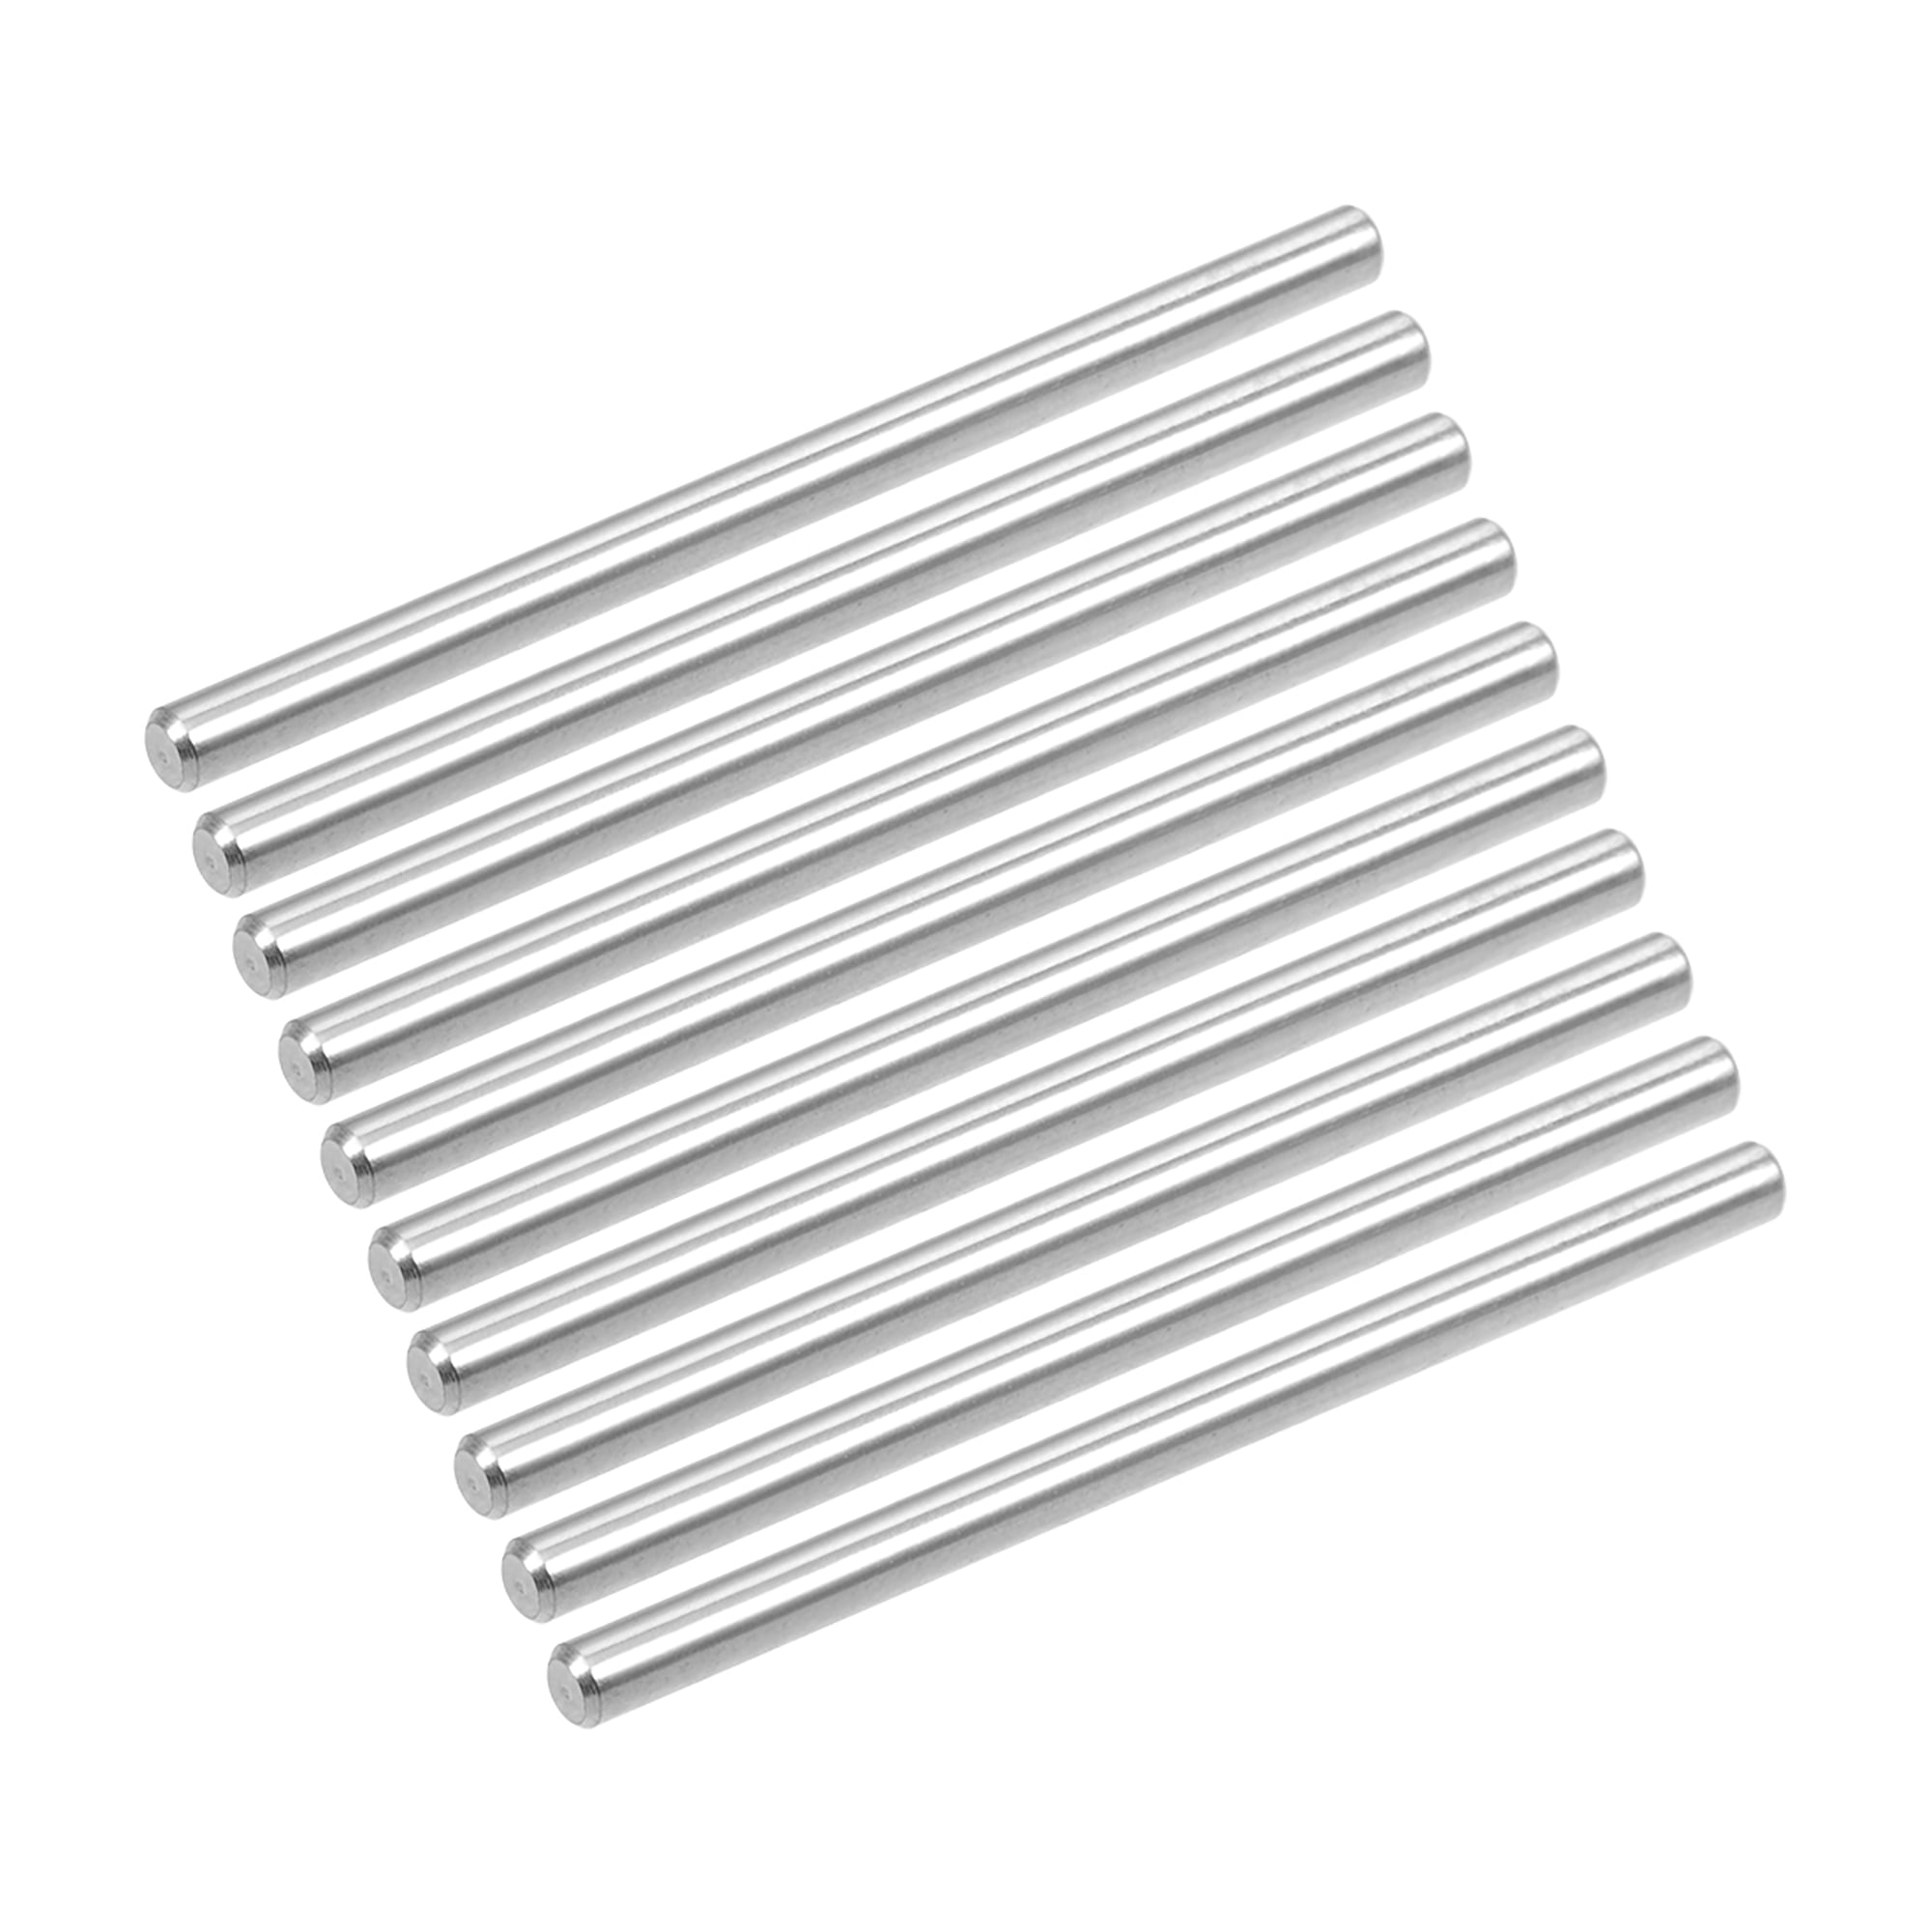 10pcs 3mmx50mm Dowel Pin 304 Stainless, Metal Dowel Rods For Bunk Beds